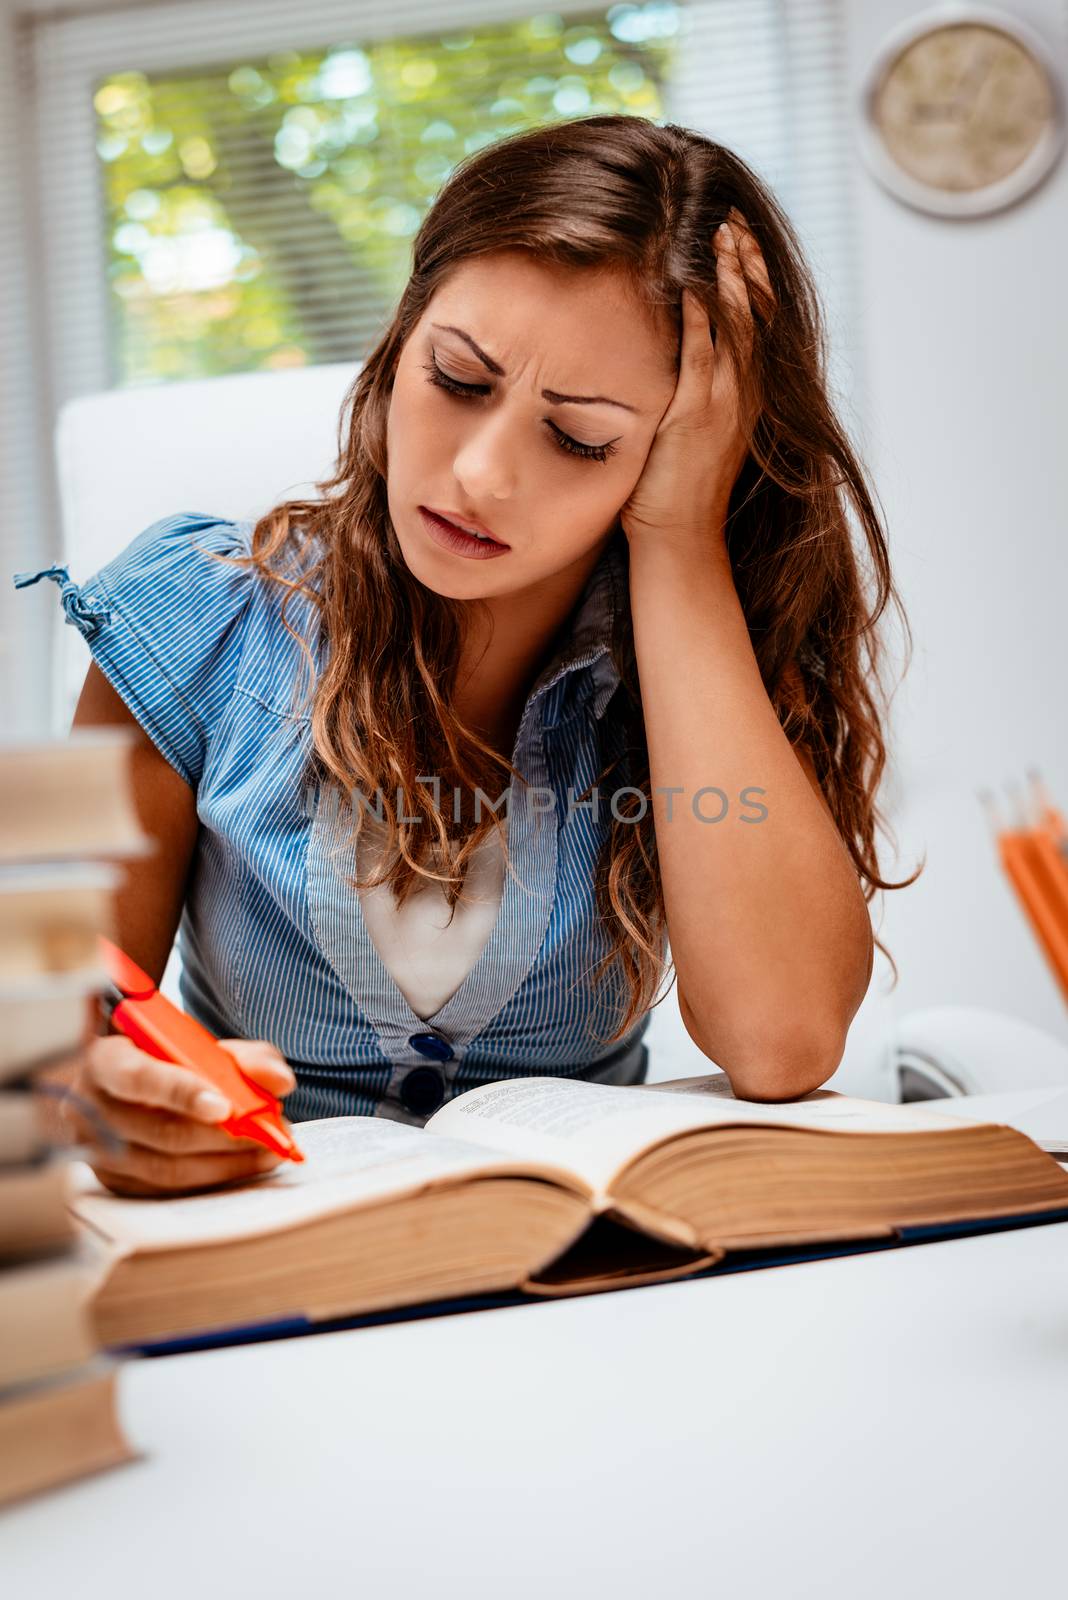 Beautiful young woman learning in the library. She is reading book and holding her head.